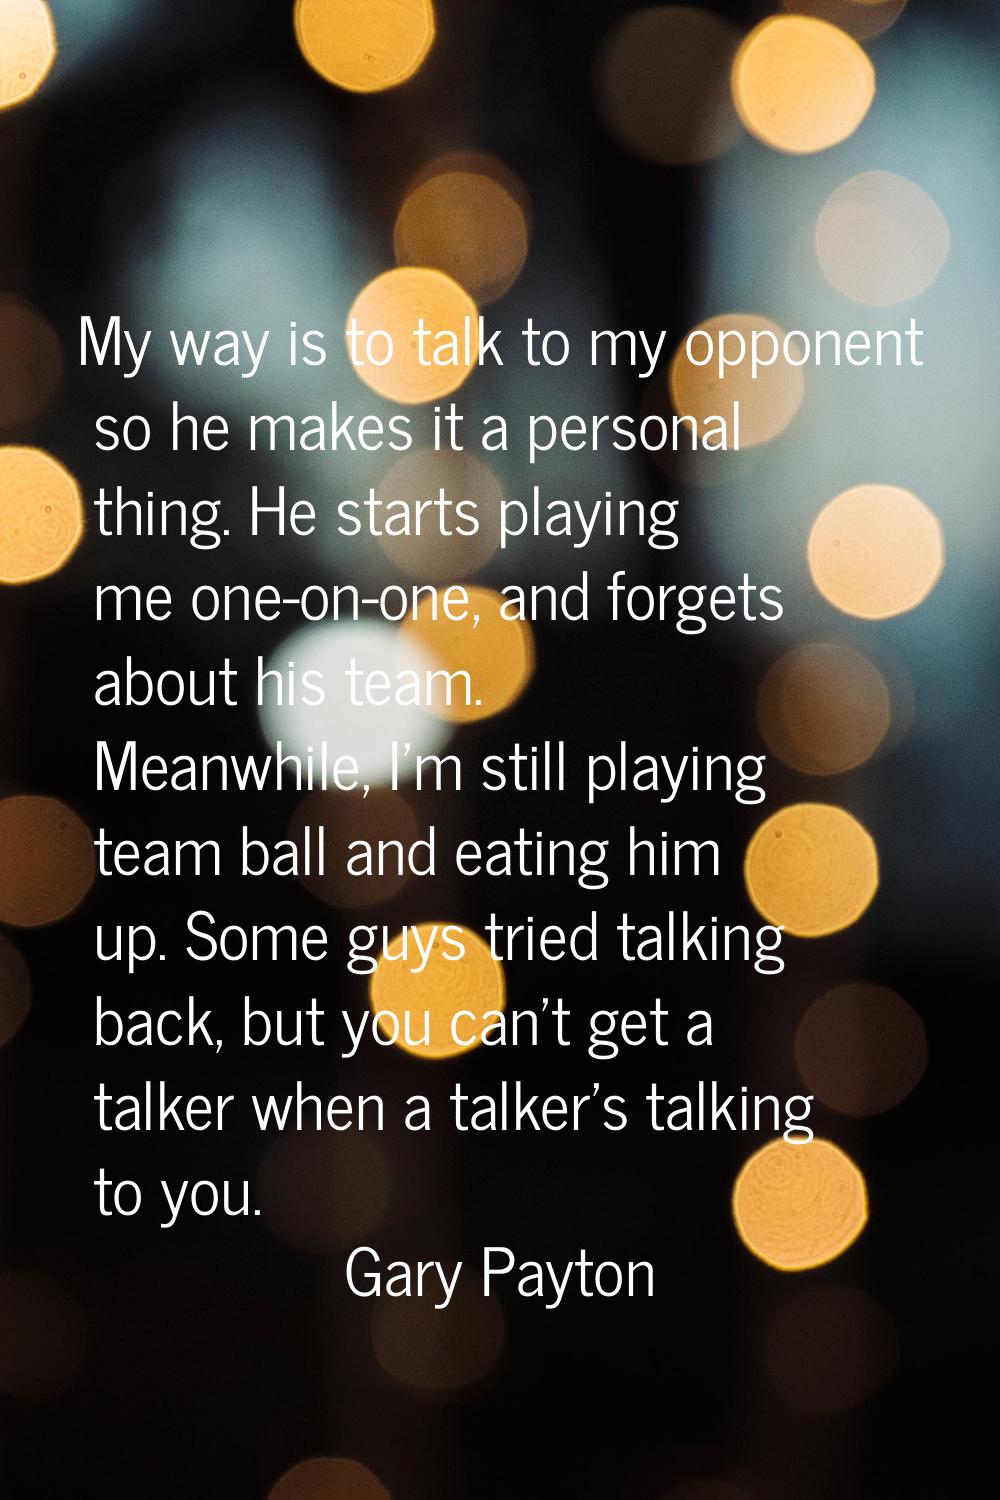 My way is to talk to my opponent so he makes it a personal thing. He starts playing me one-on-one, 